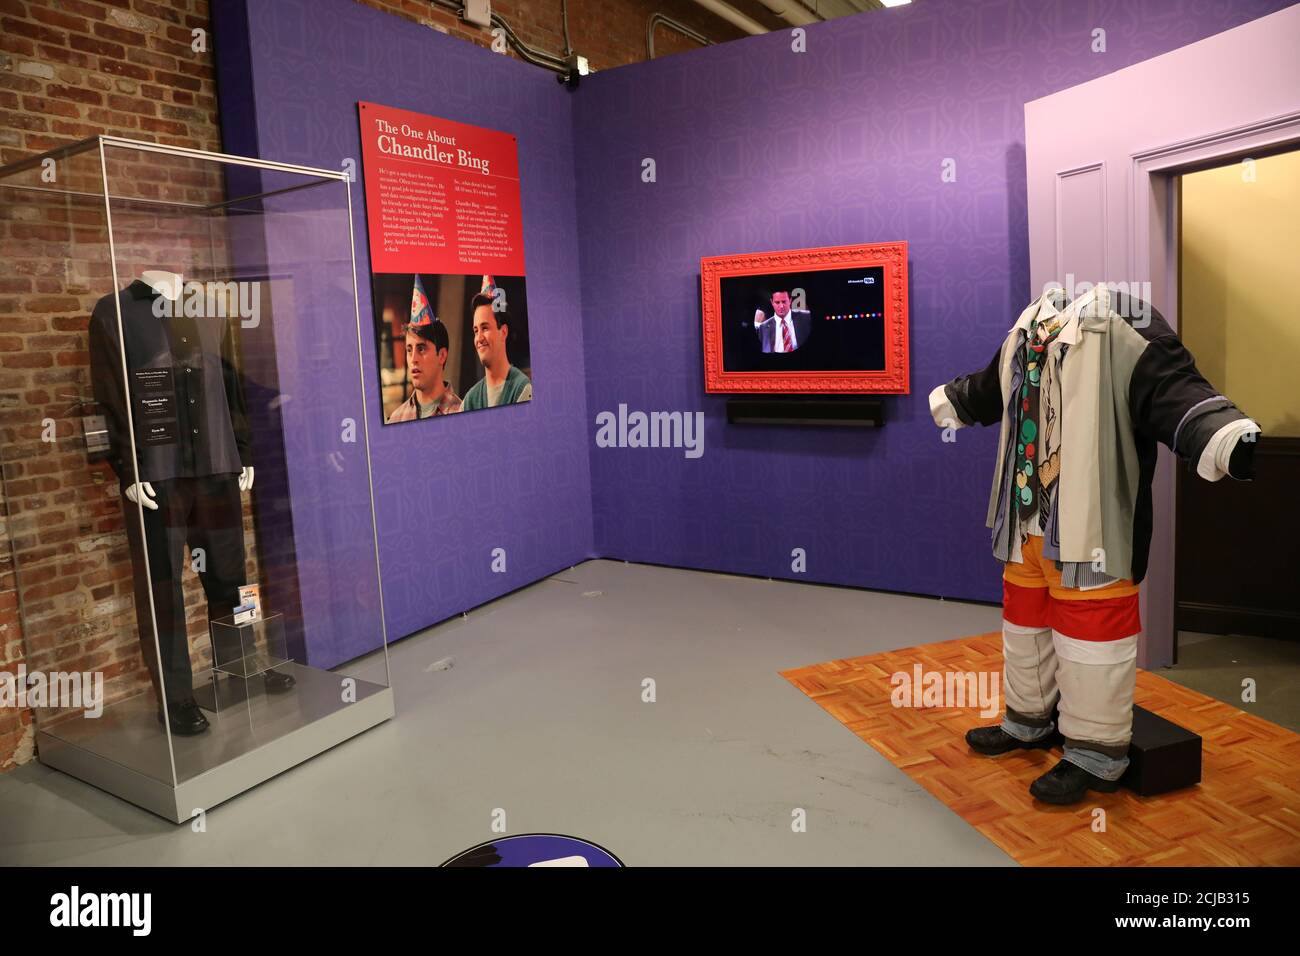 Clothes worn by actors in the television series 'Friends' are seen at the ' Friends' pop-up store marking the 25th anniversary of the television series in  New York City, U.S.,September 5, 2019. REUTERS/Shannon